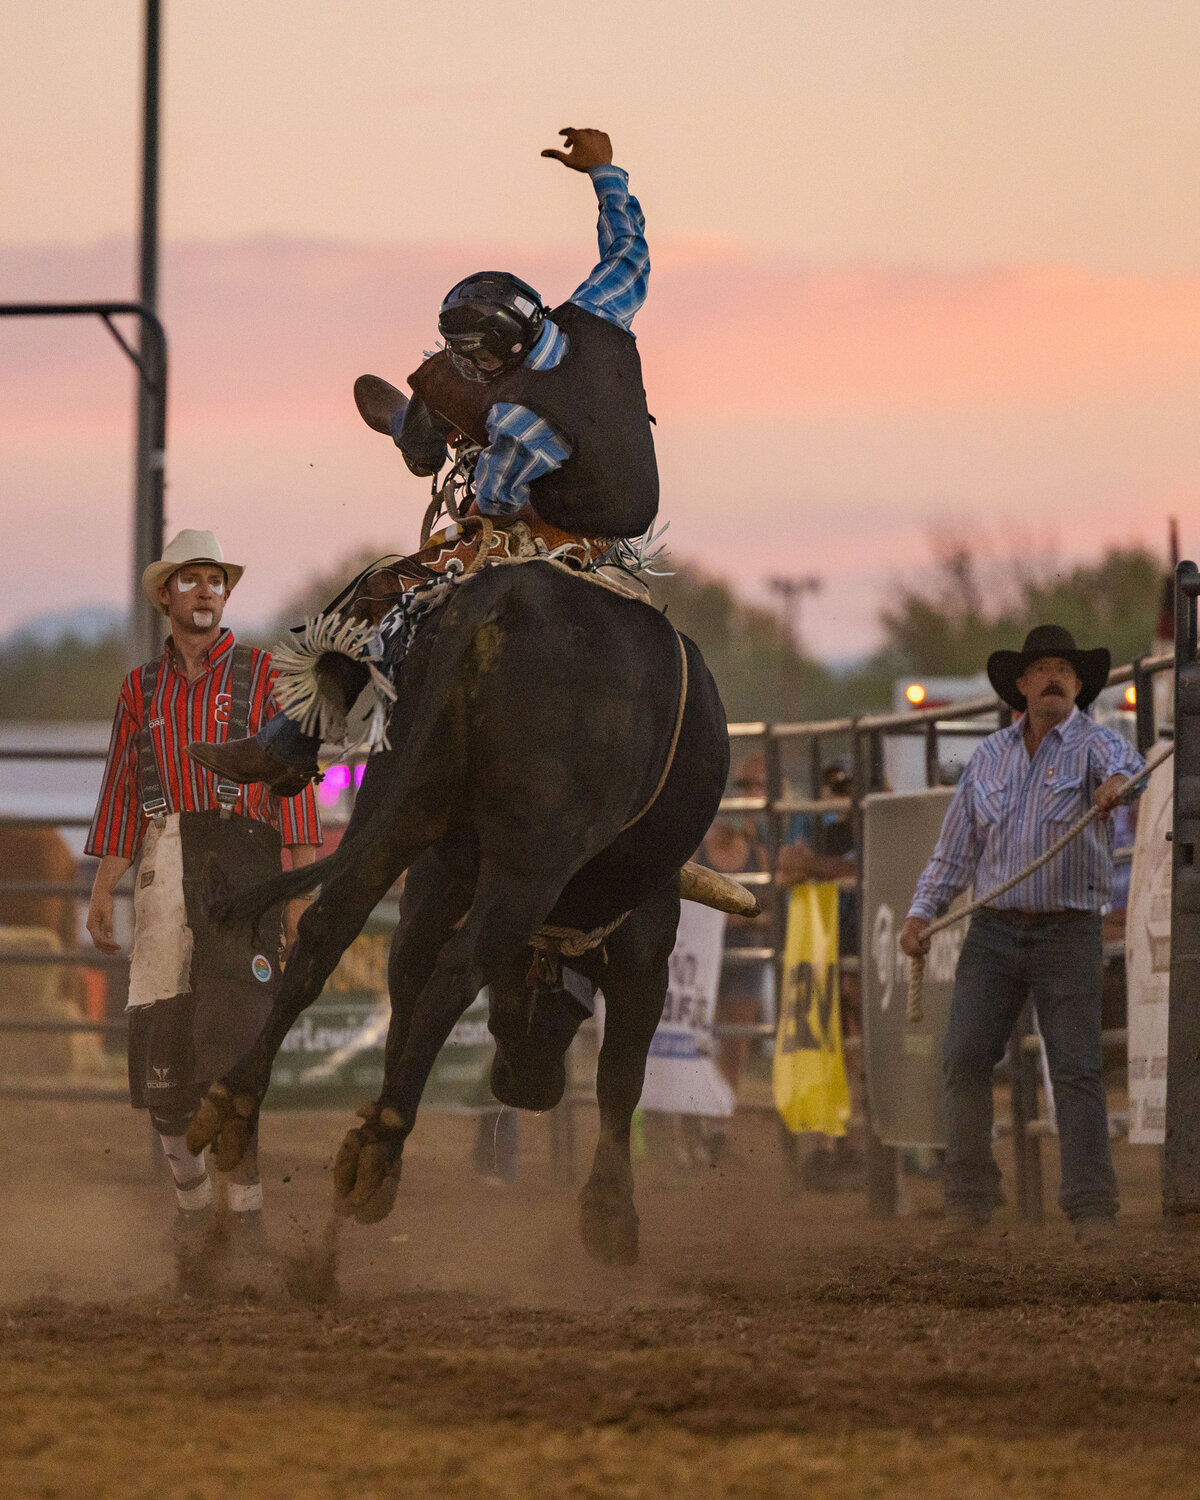 Benjamin Viveros, of Yelm, is bucked off of “Flatliner” on night one of the Southwest Washington Fair Rodeo on Wednesday, Aug. 16.